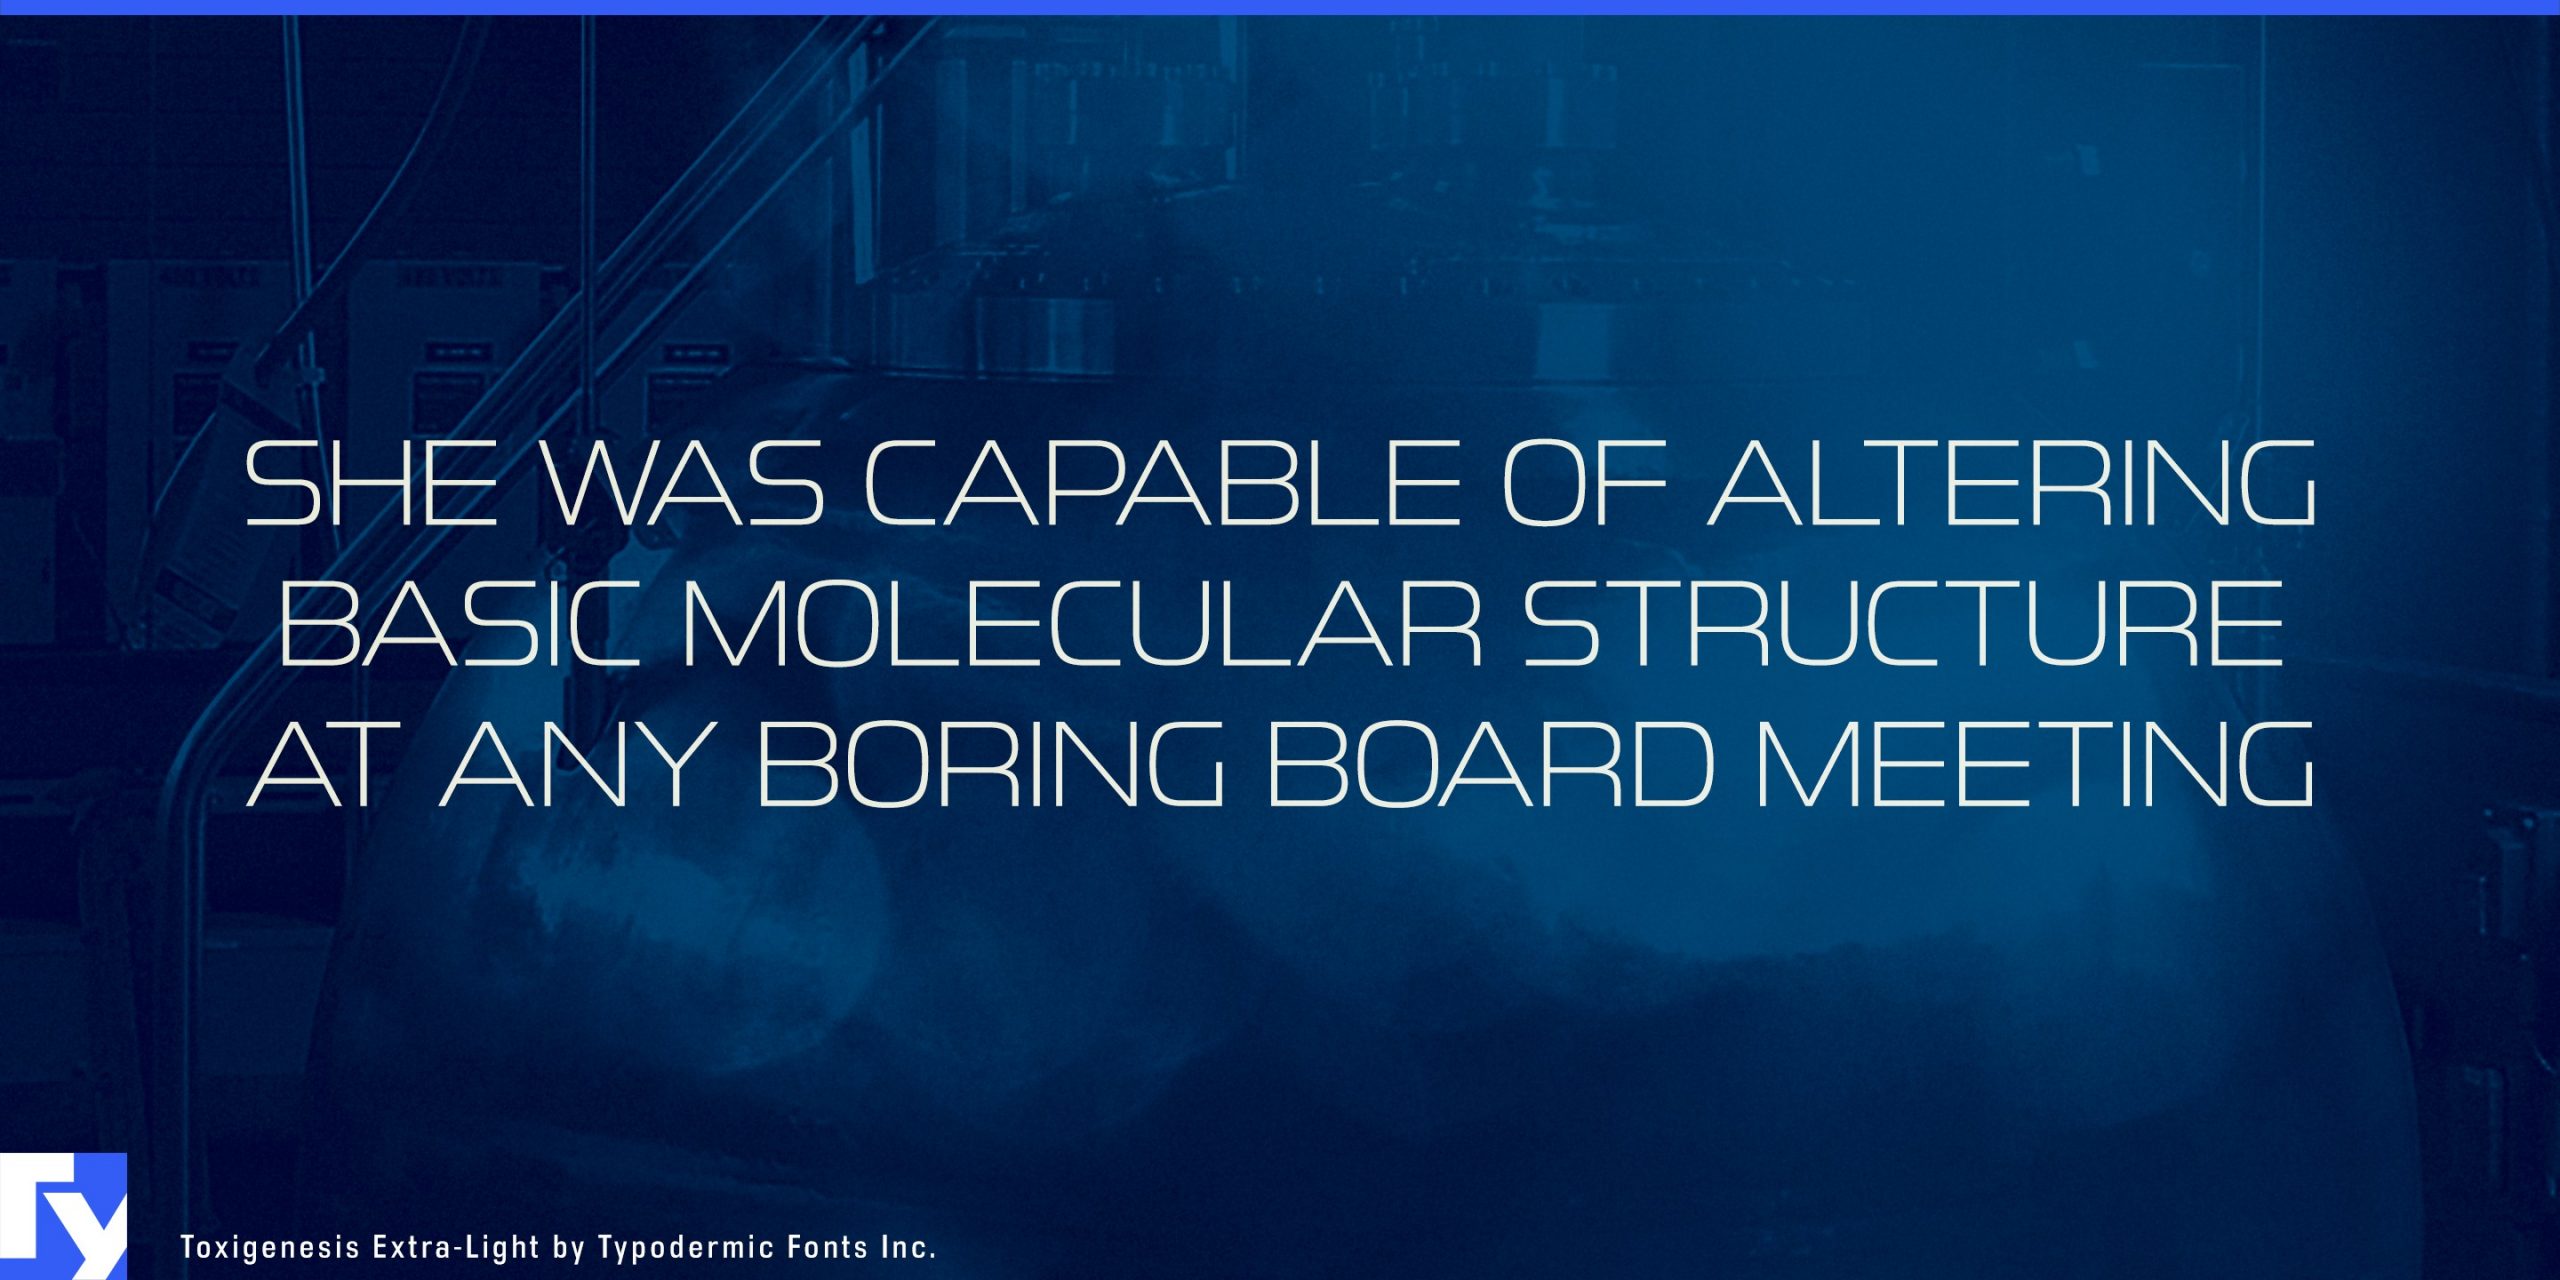 Convey scientific power with Toxigenesis, the typeface inspired by high-tech industries.